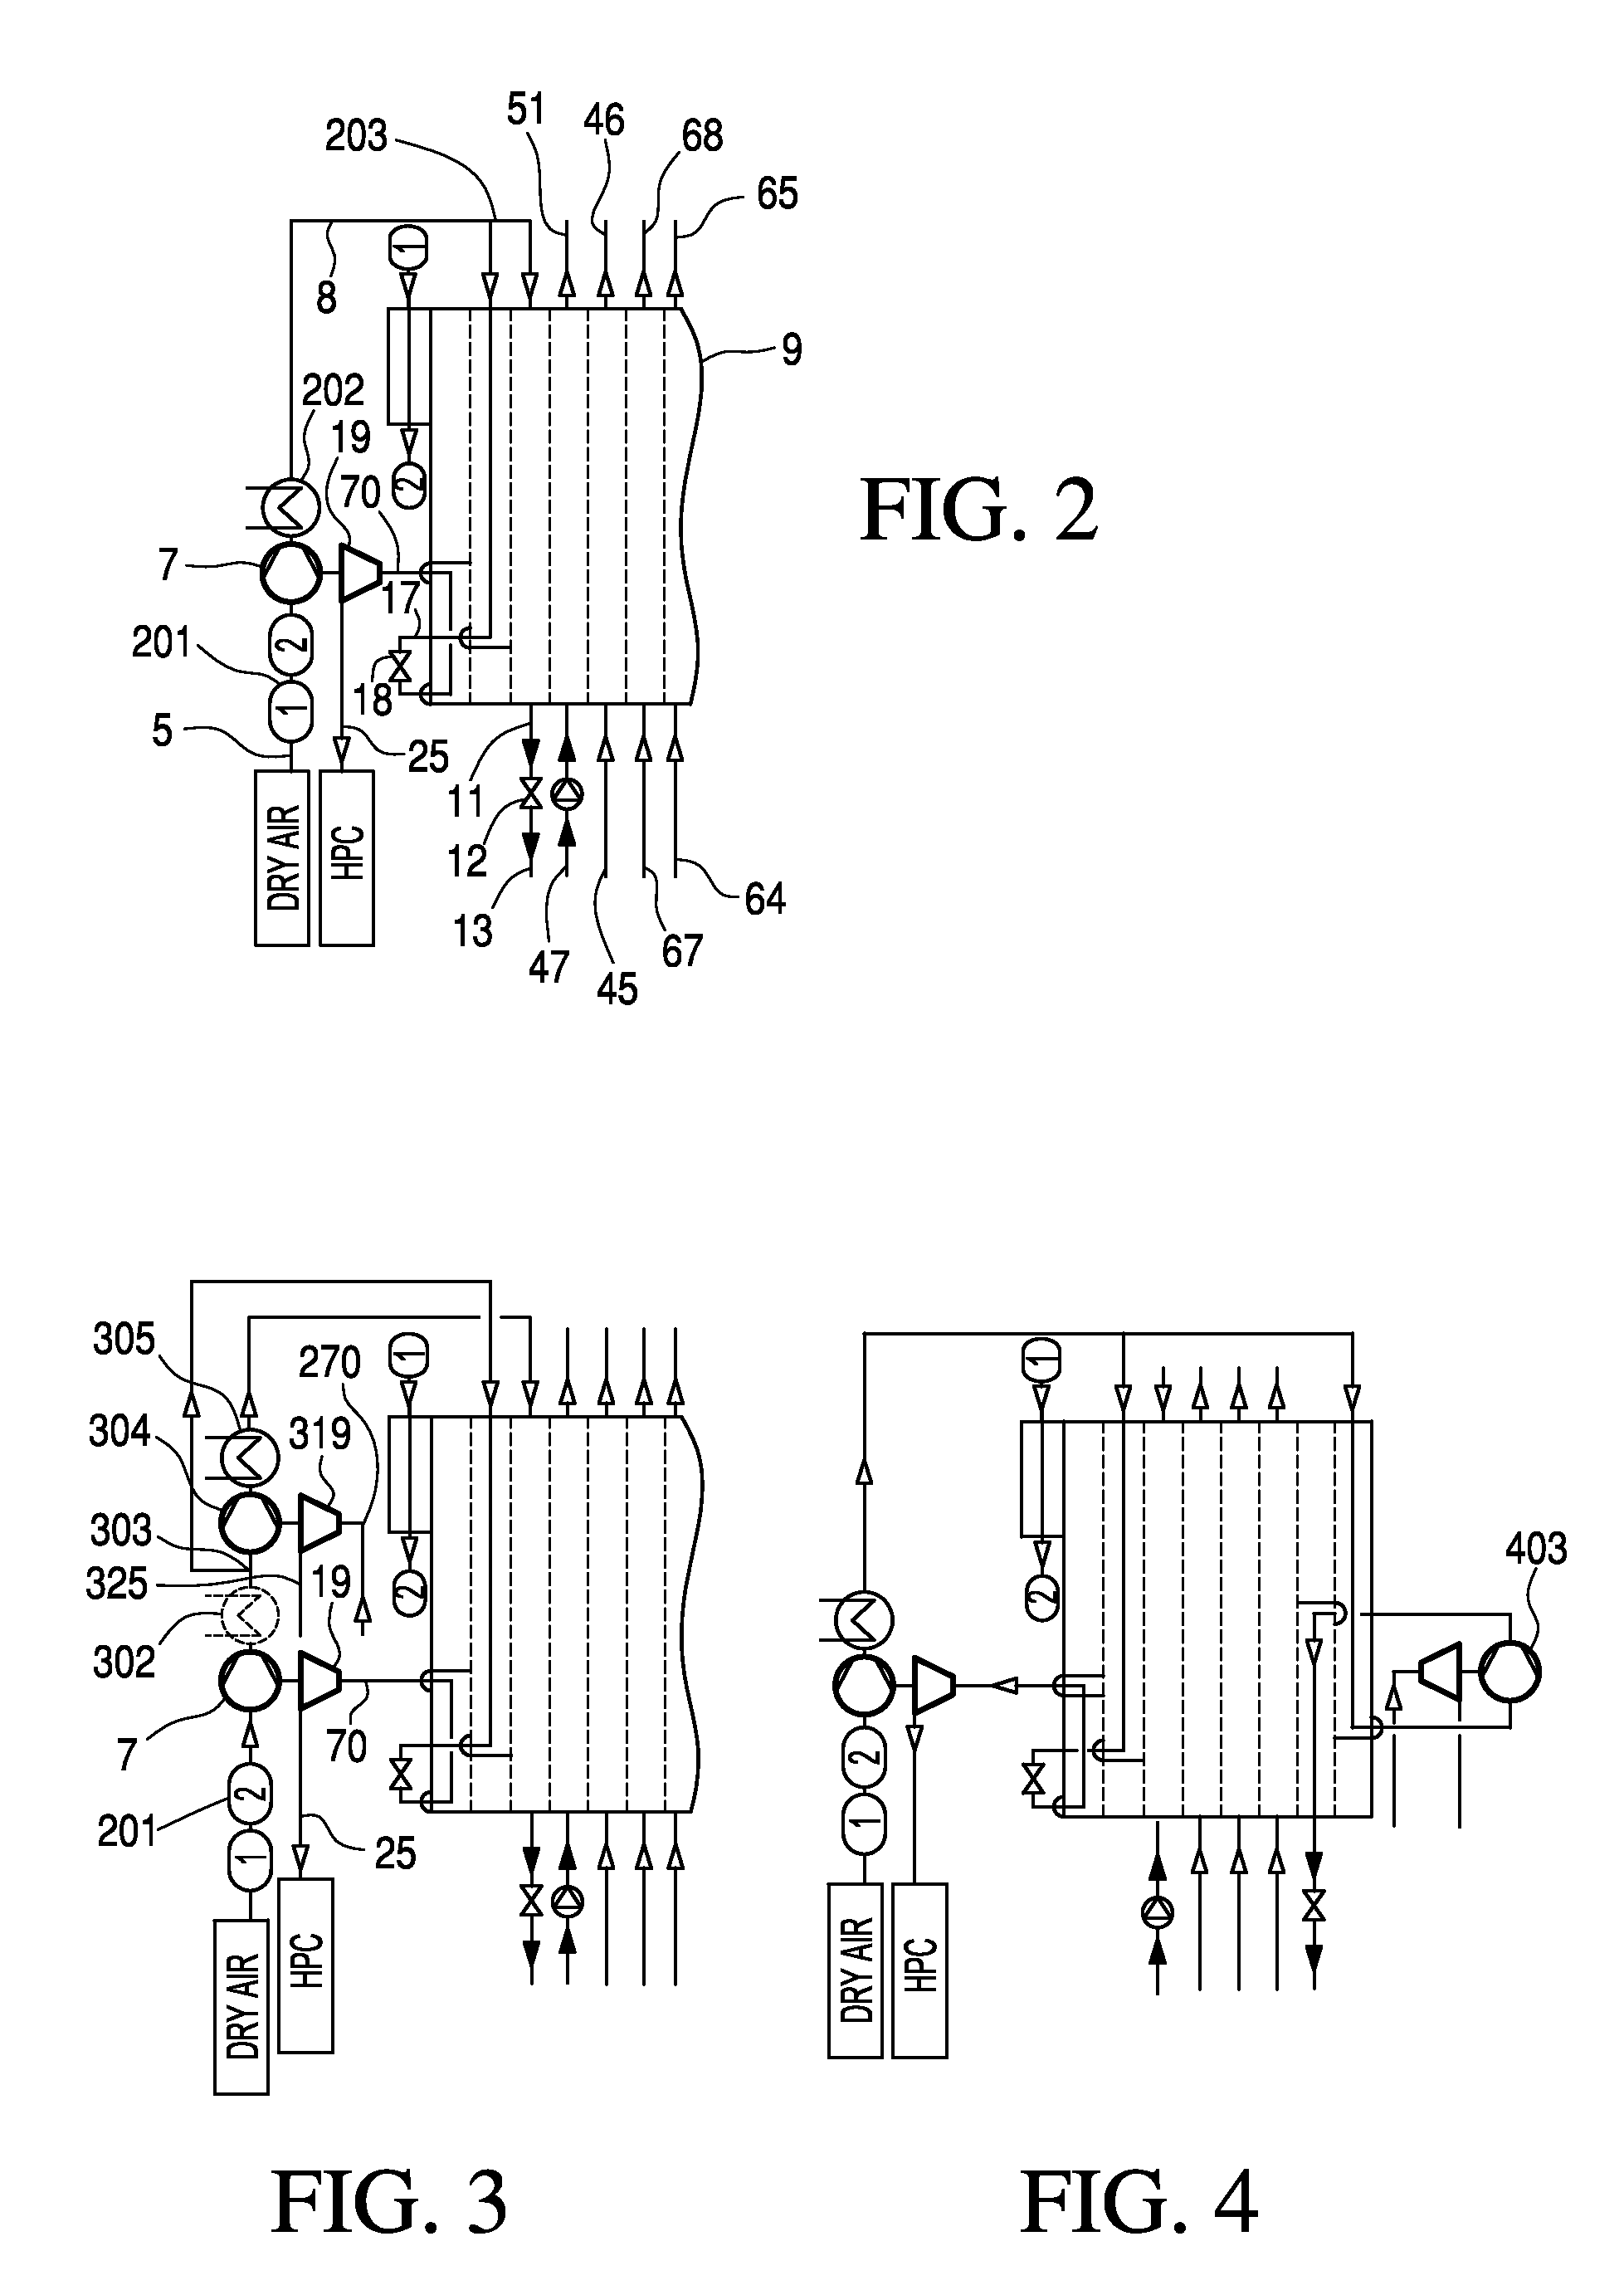 Processes and Device for Low Temperature Separation of Air